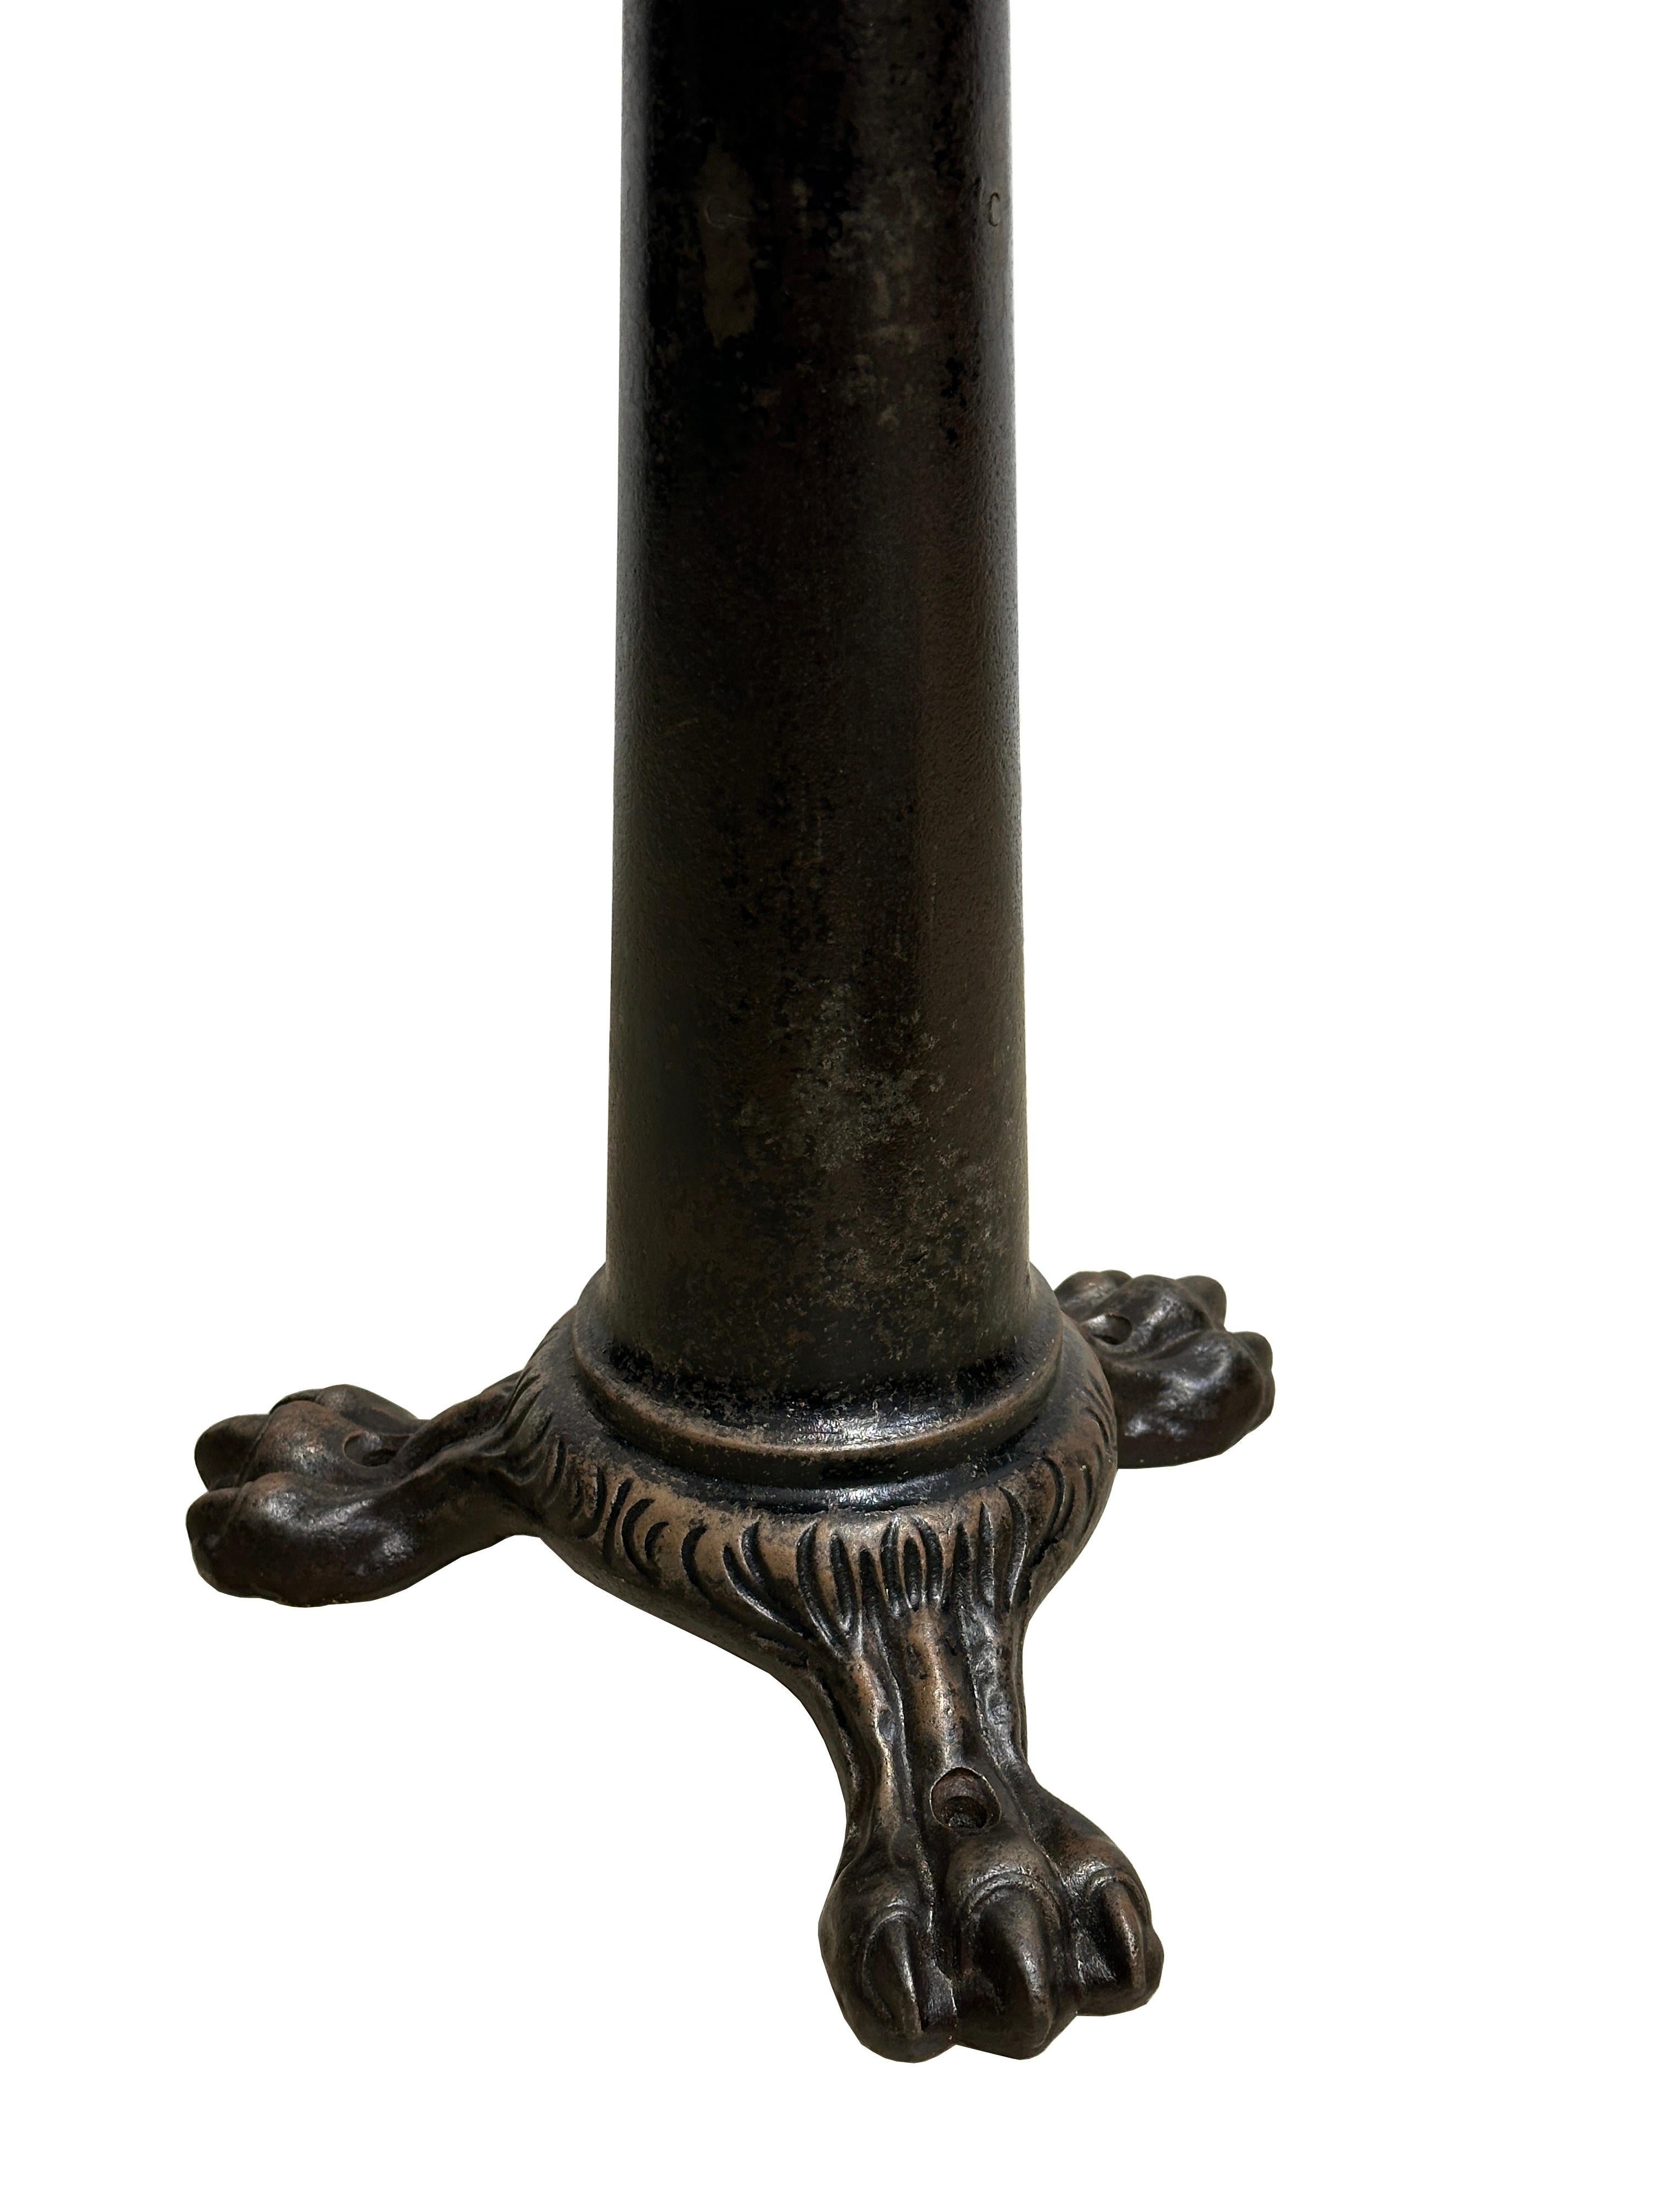 - A beautiful original and extremely rare first edition Singer work stool, England, late 19th Century.
- Cast iron base with signature claw foot design, reminiscent of the Victorian era.
- Seat is height adjustable and working perfectly, the top is